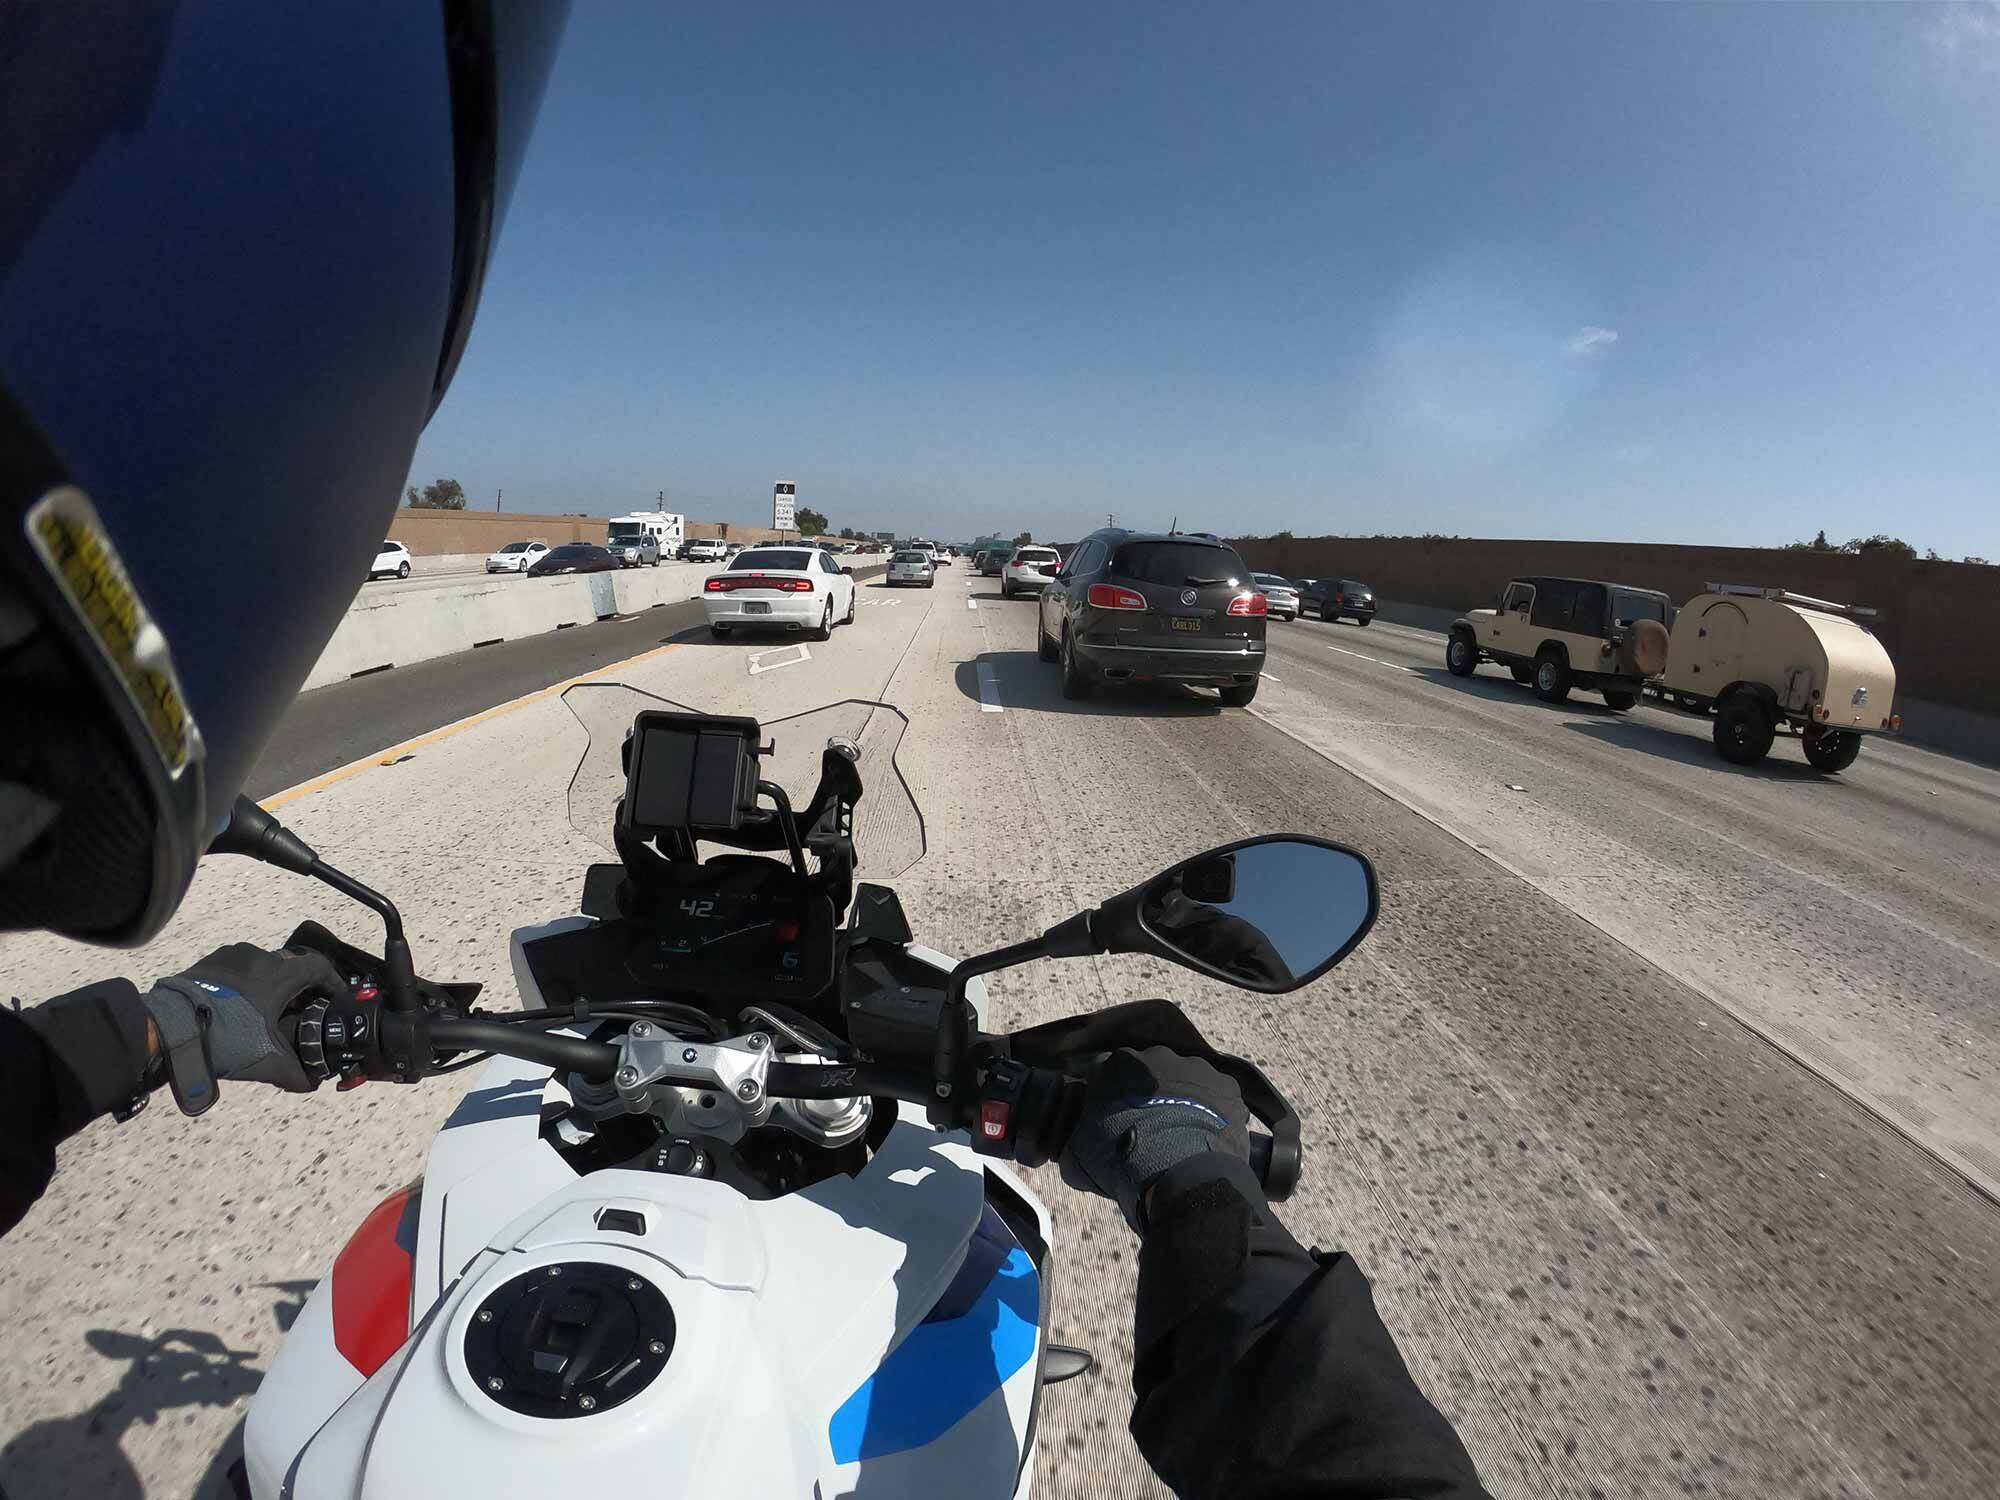 There are more riders on the road this season, and the MSF is asking all motorists to be on the lookout.